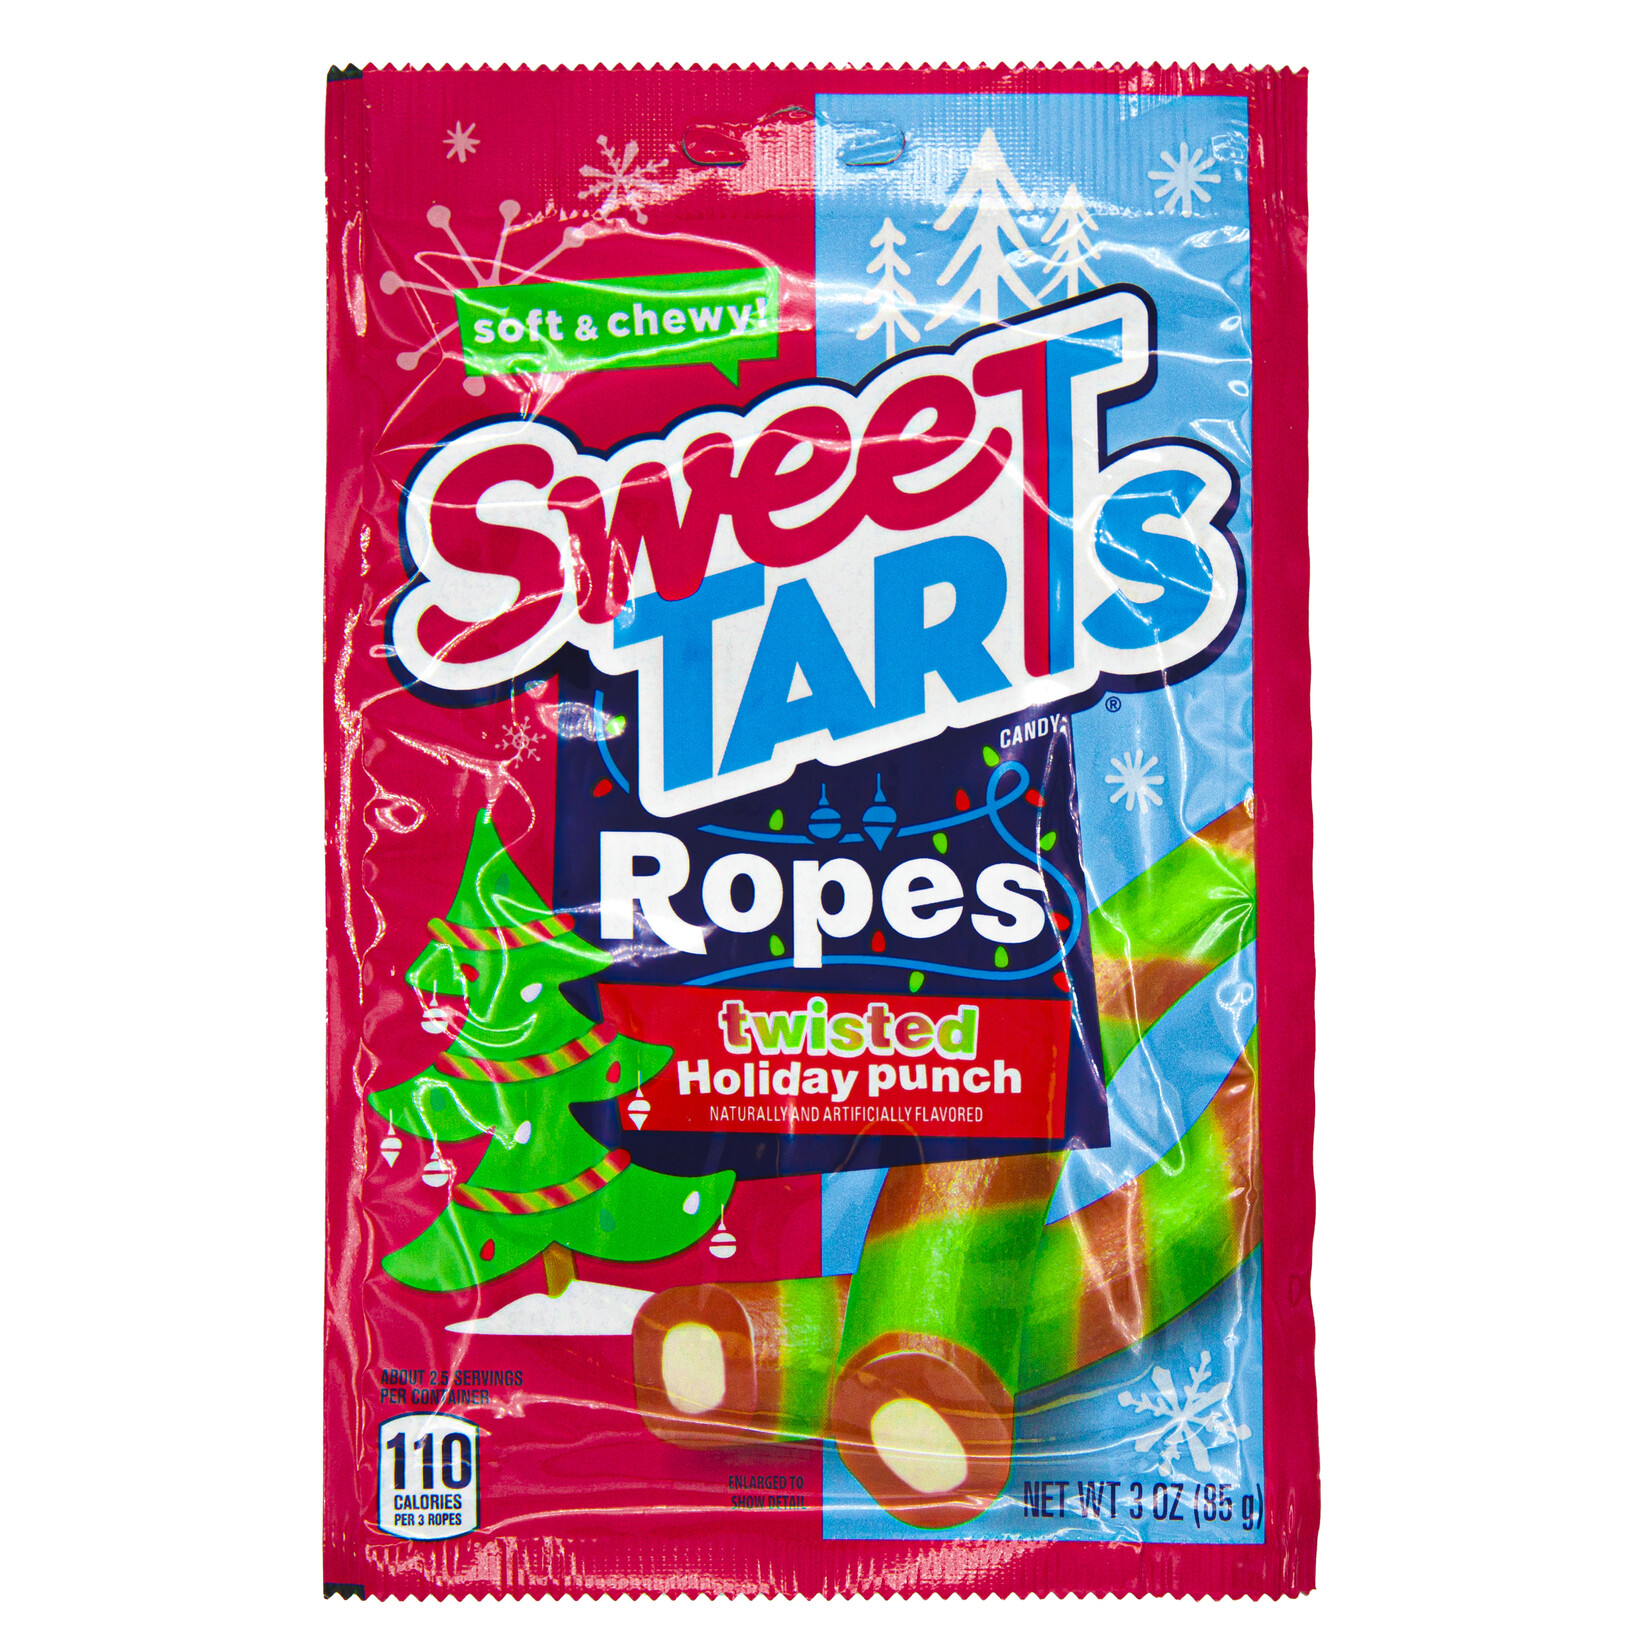 Sweet Tarts Ropes twisted holiday punch 85g